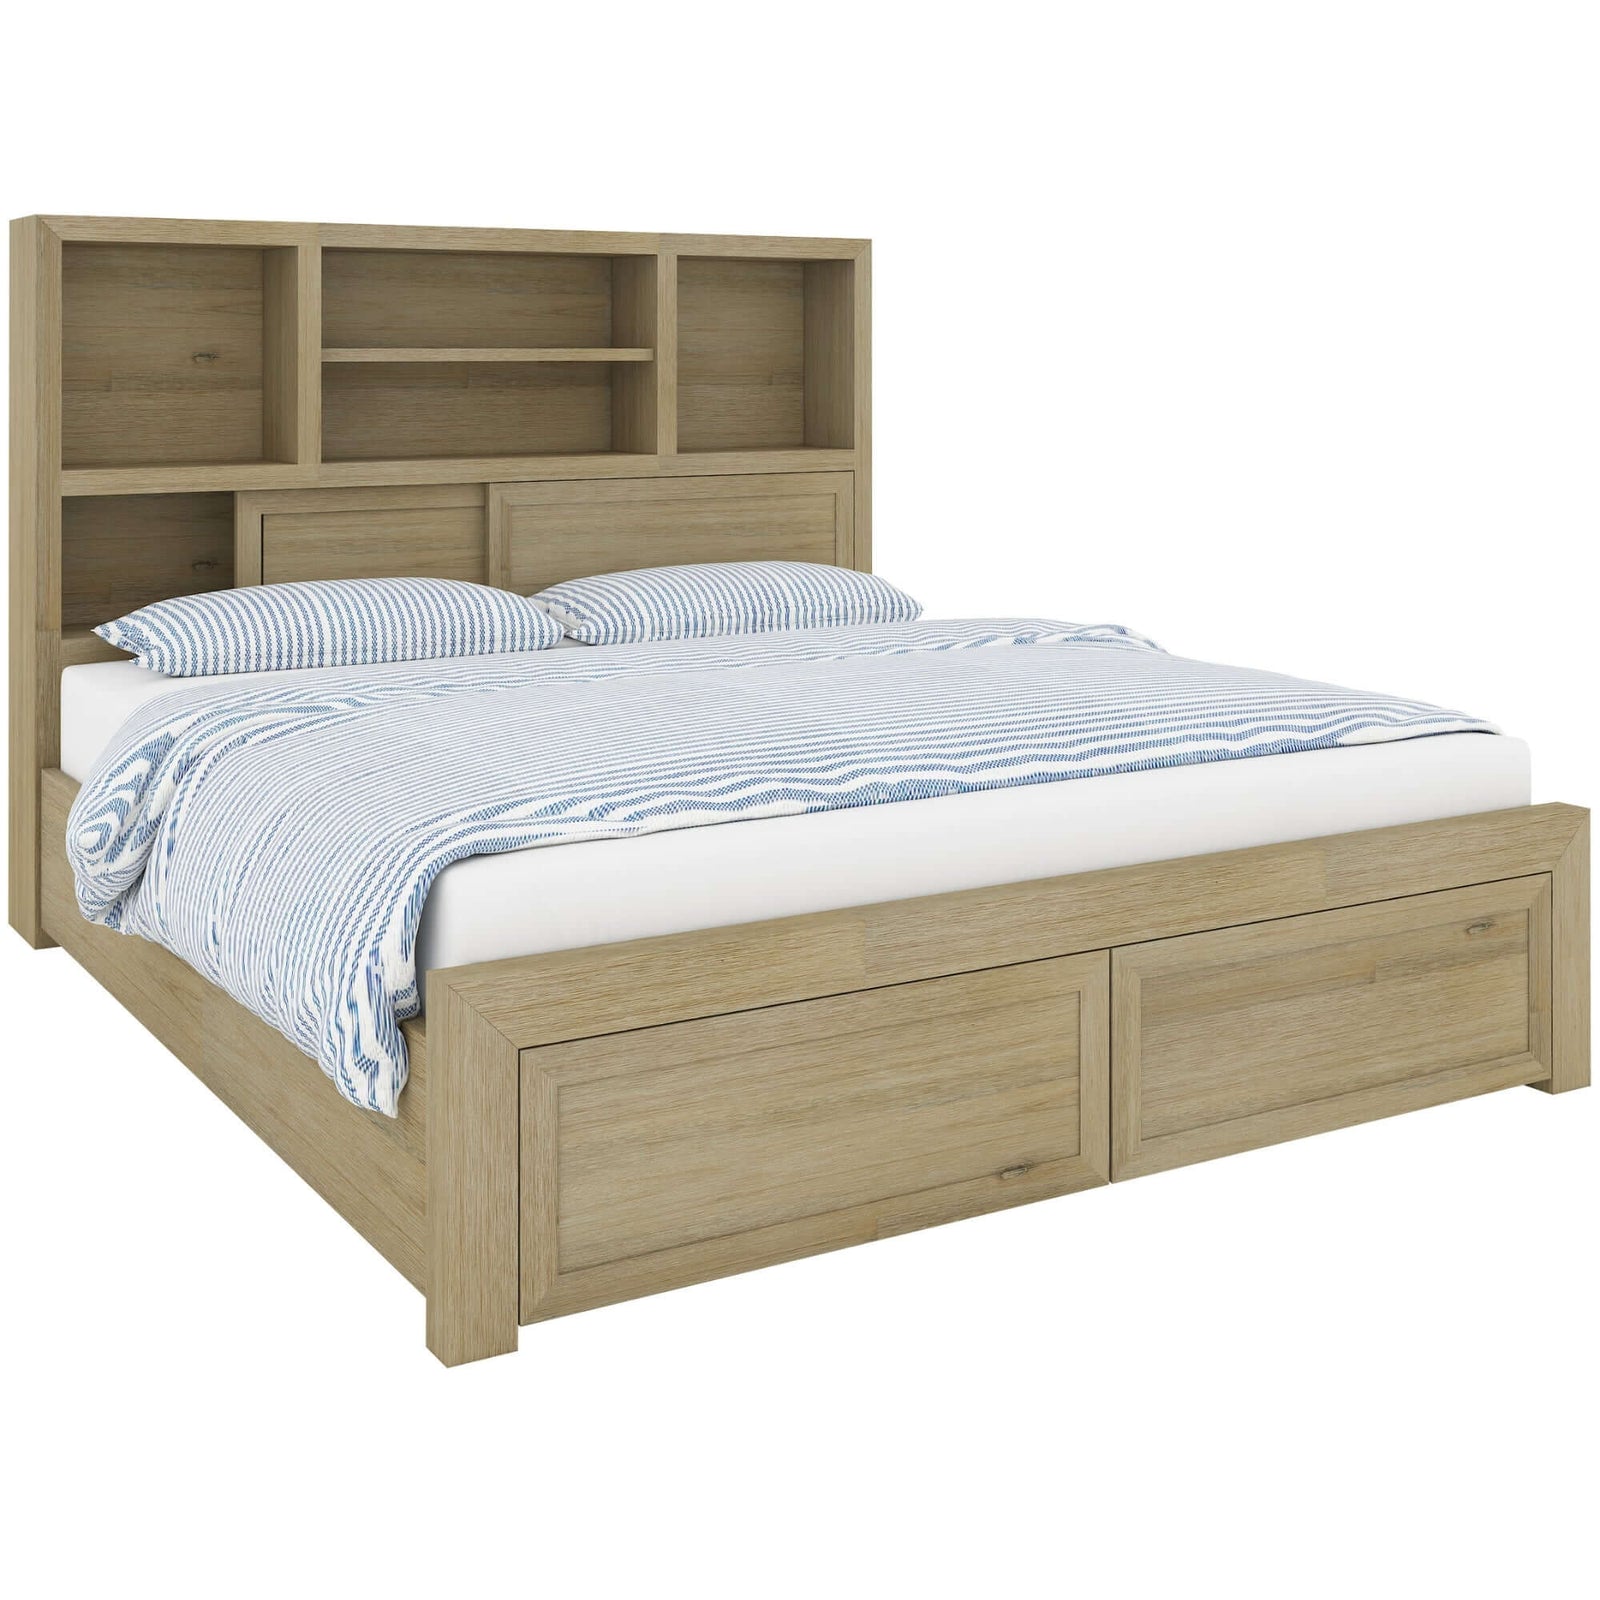 Gracelyn King Bed Frame Solid Wood Mattress Base With Storage Drawers - Smoke-Upinteriors